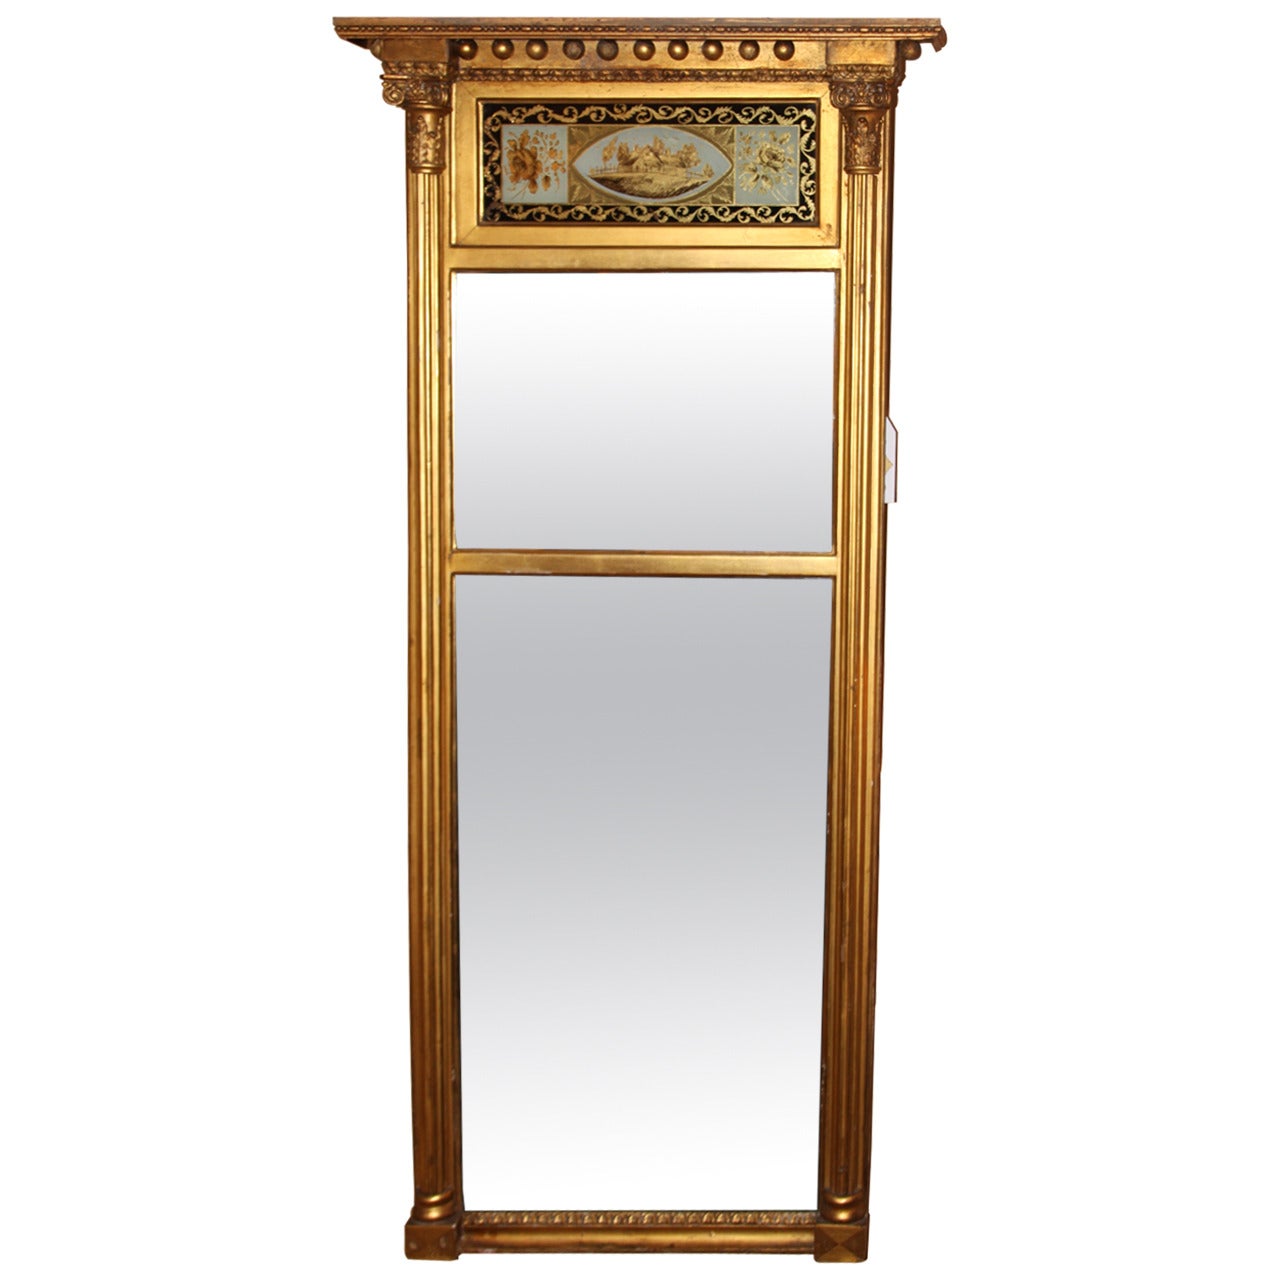 Early 19th Century Federal Giltwood Mirror For Sale